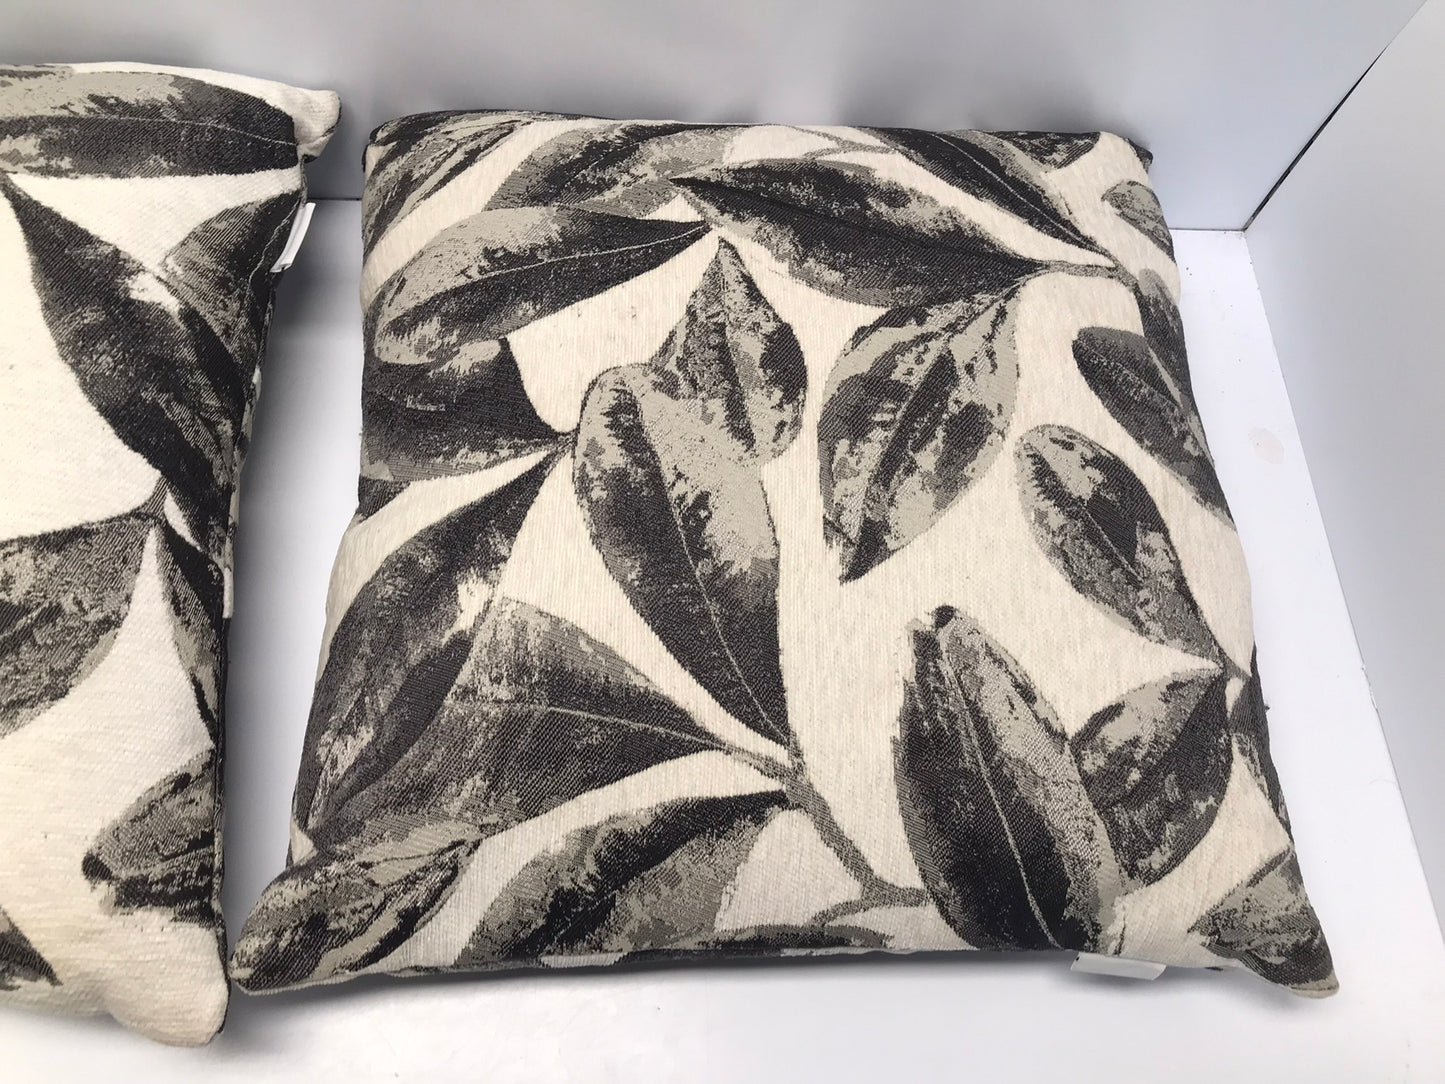 Urban Barn Large Pillows Grey Foliage With Zipper New With Tags Retails For $42 Each